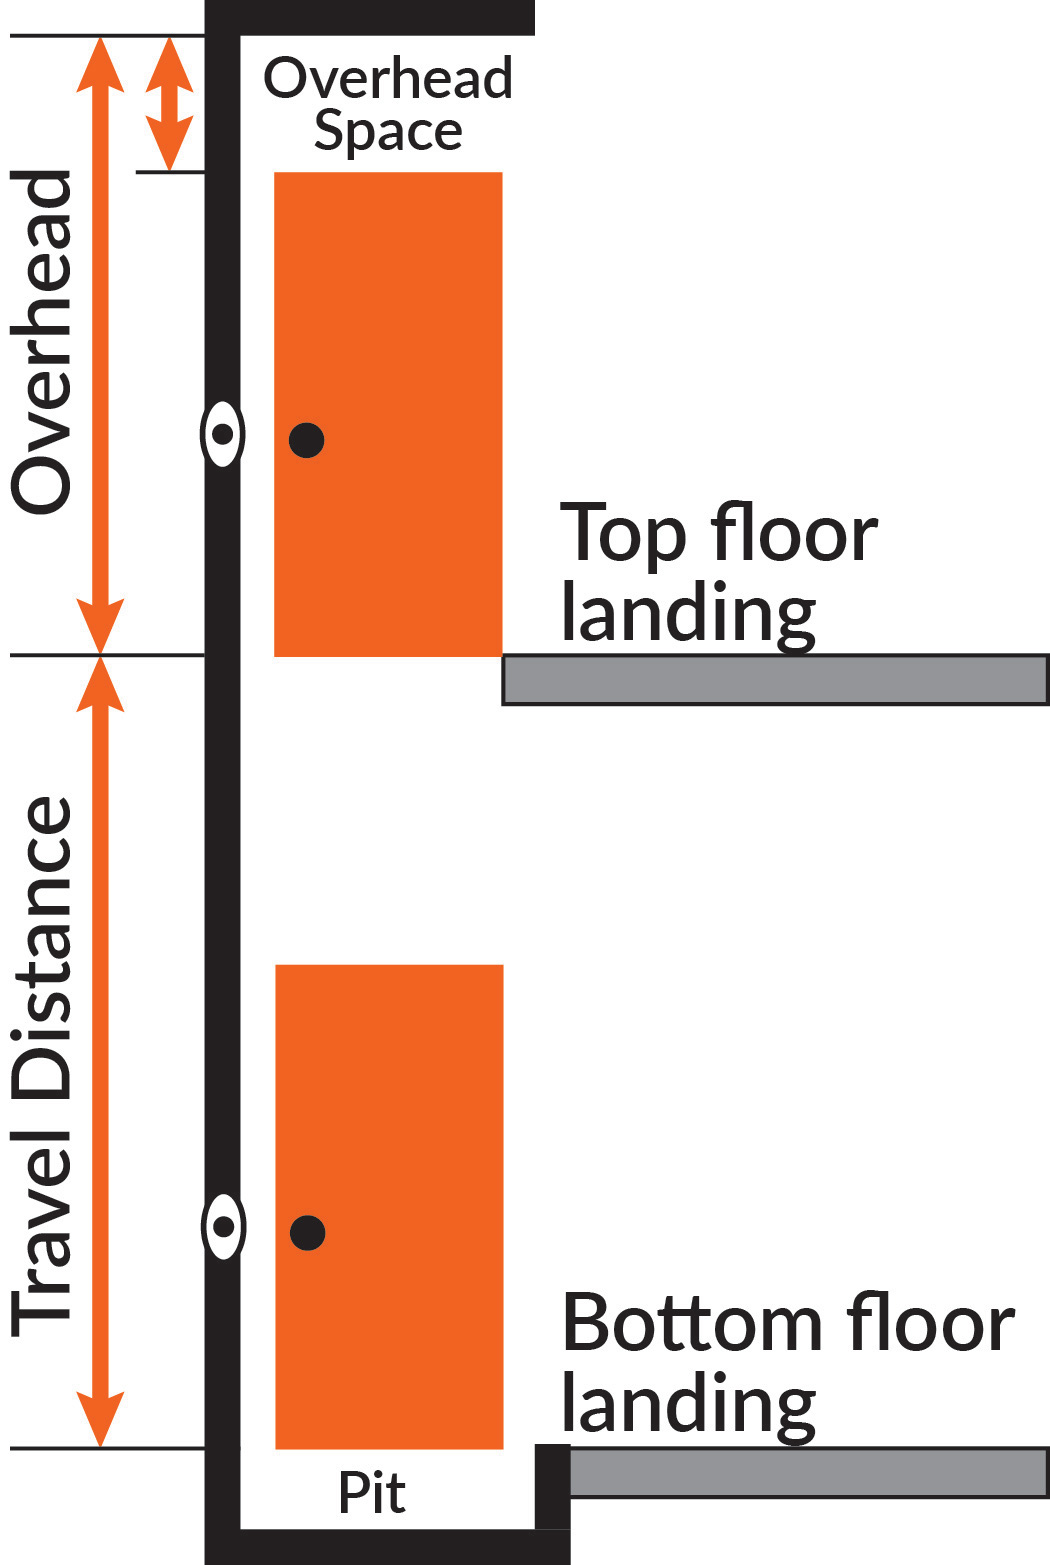 Home elevator installation diagram showing top and bottom landing floors, travel distance, overhead and pit